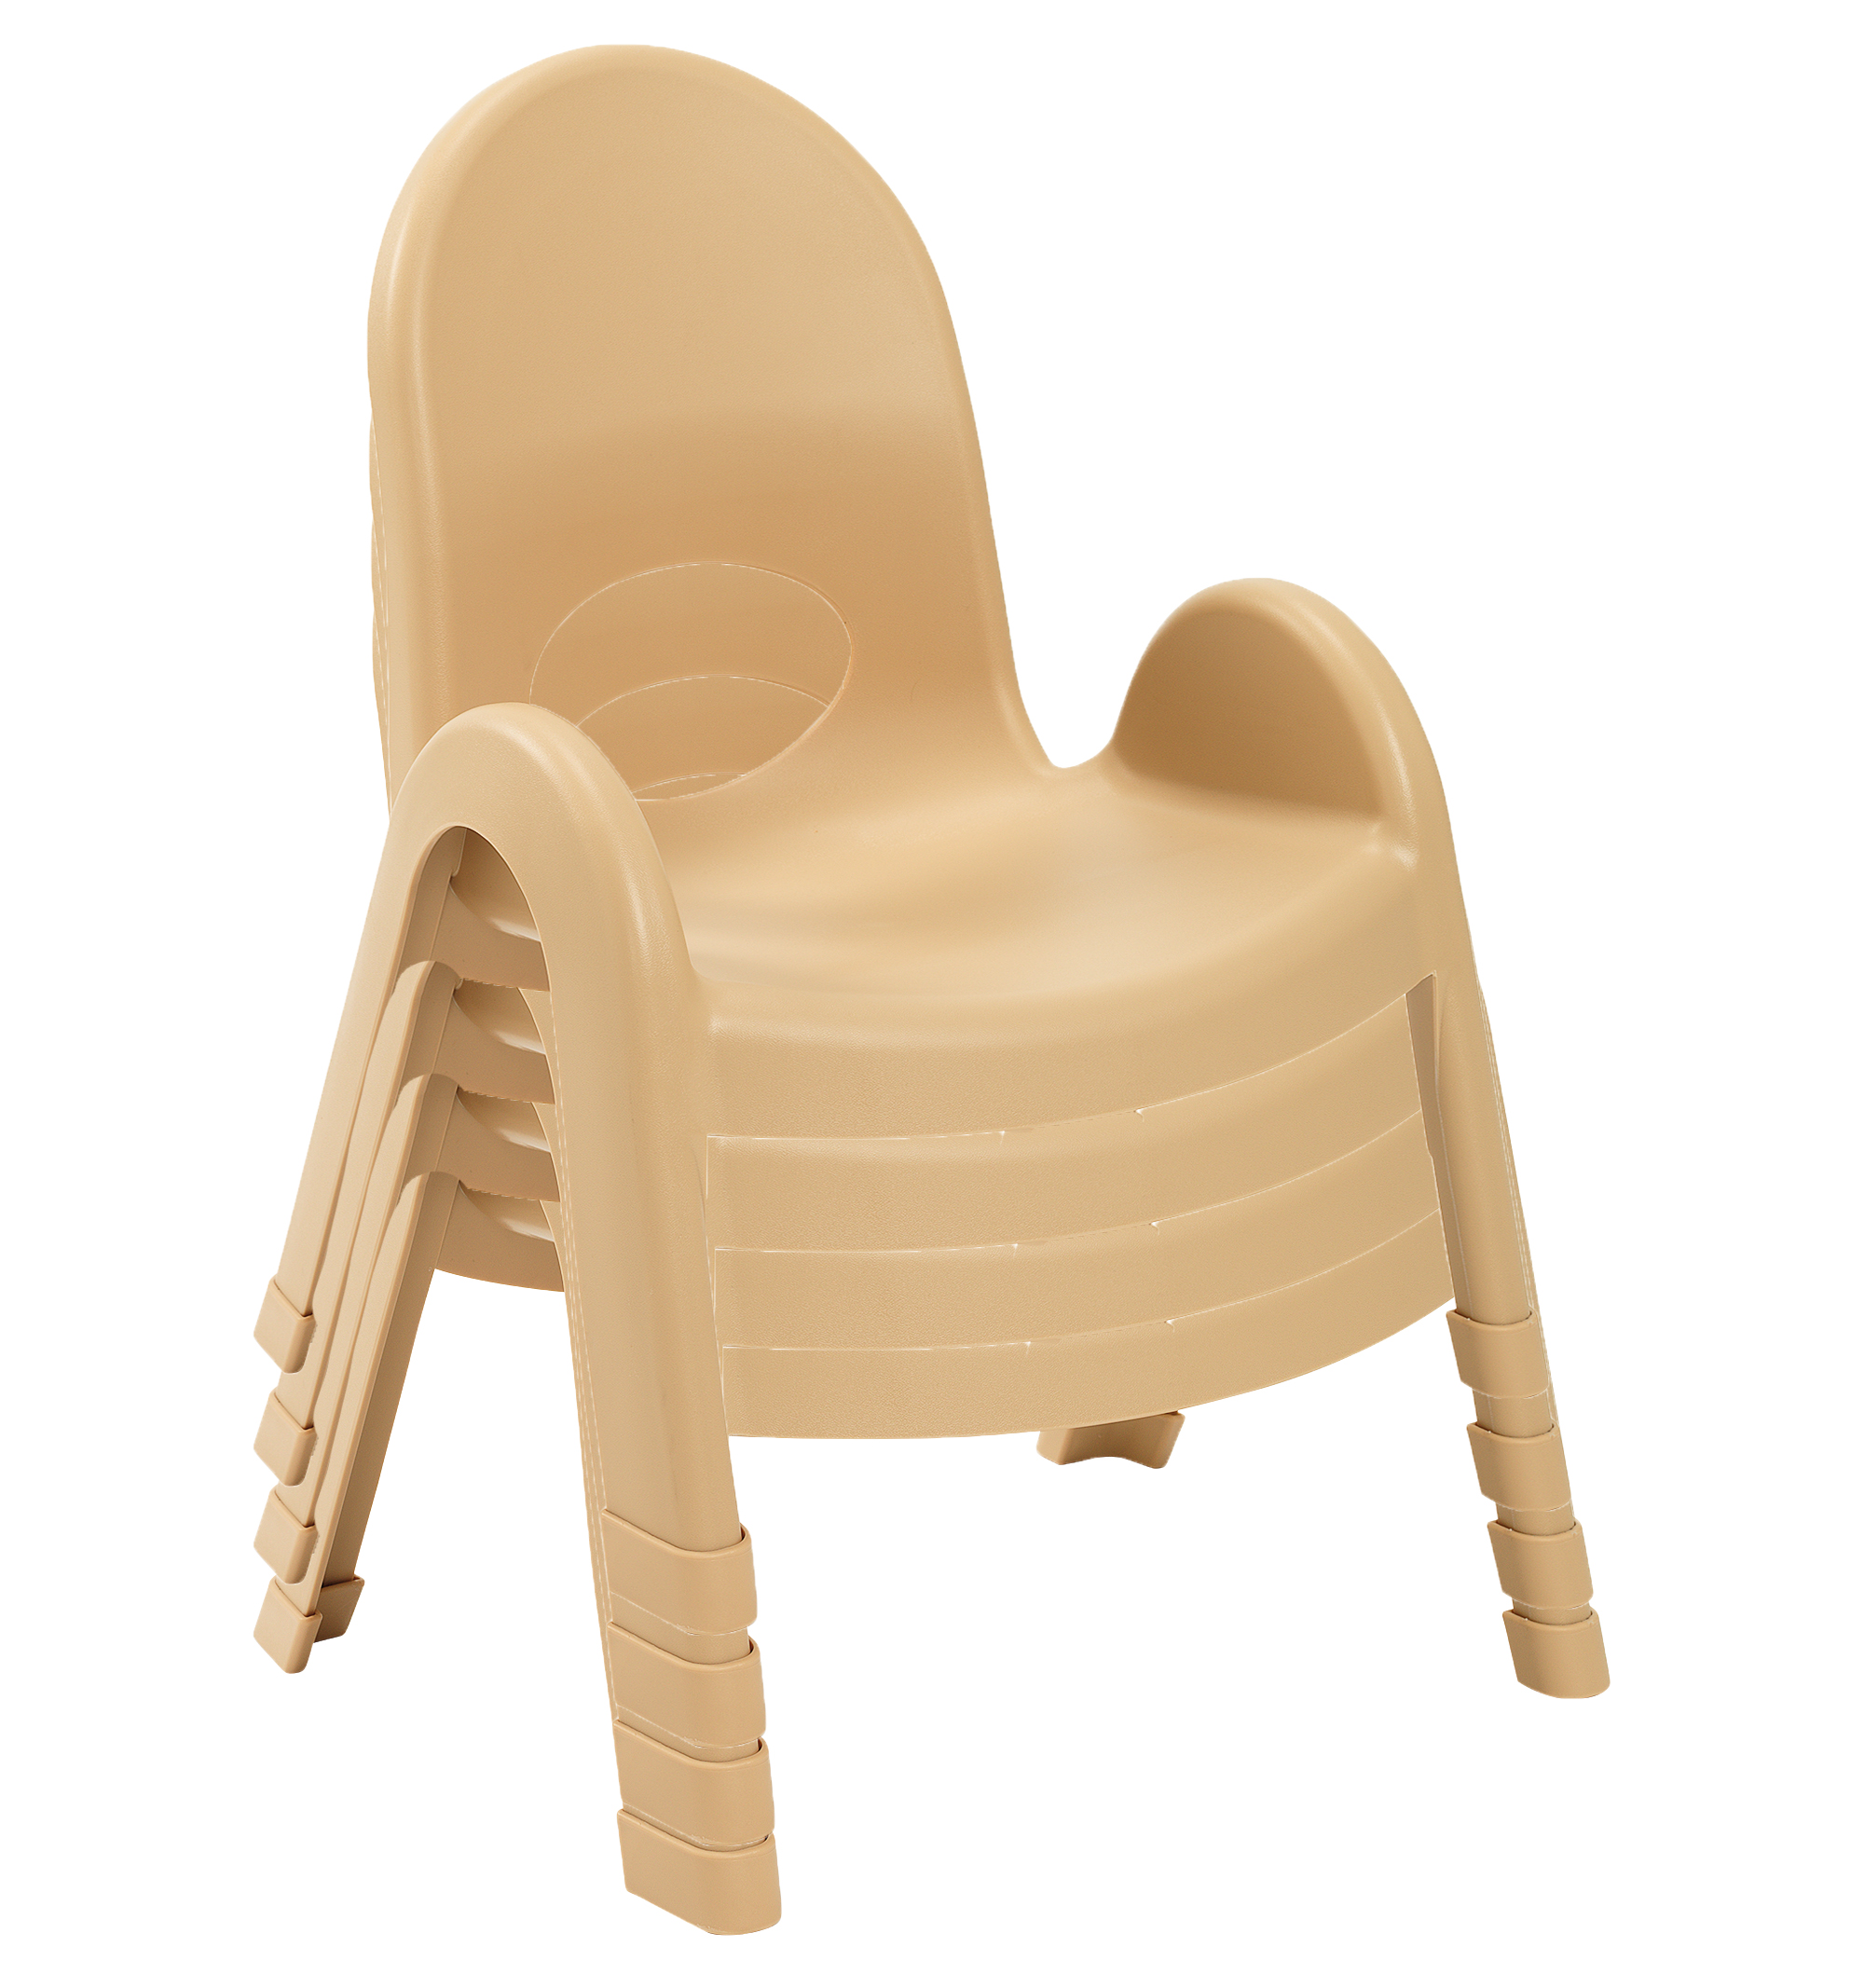 Value Stack™ 18 cm  Chair - 4 Pack - Natural Tan